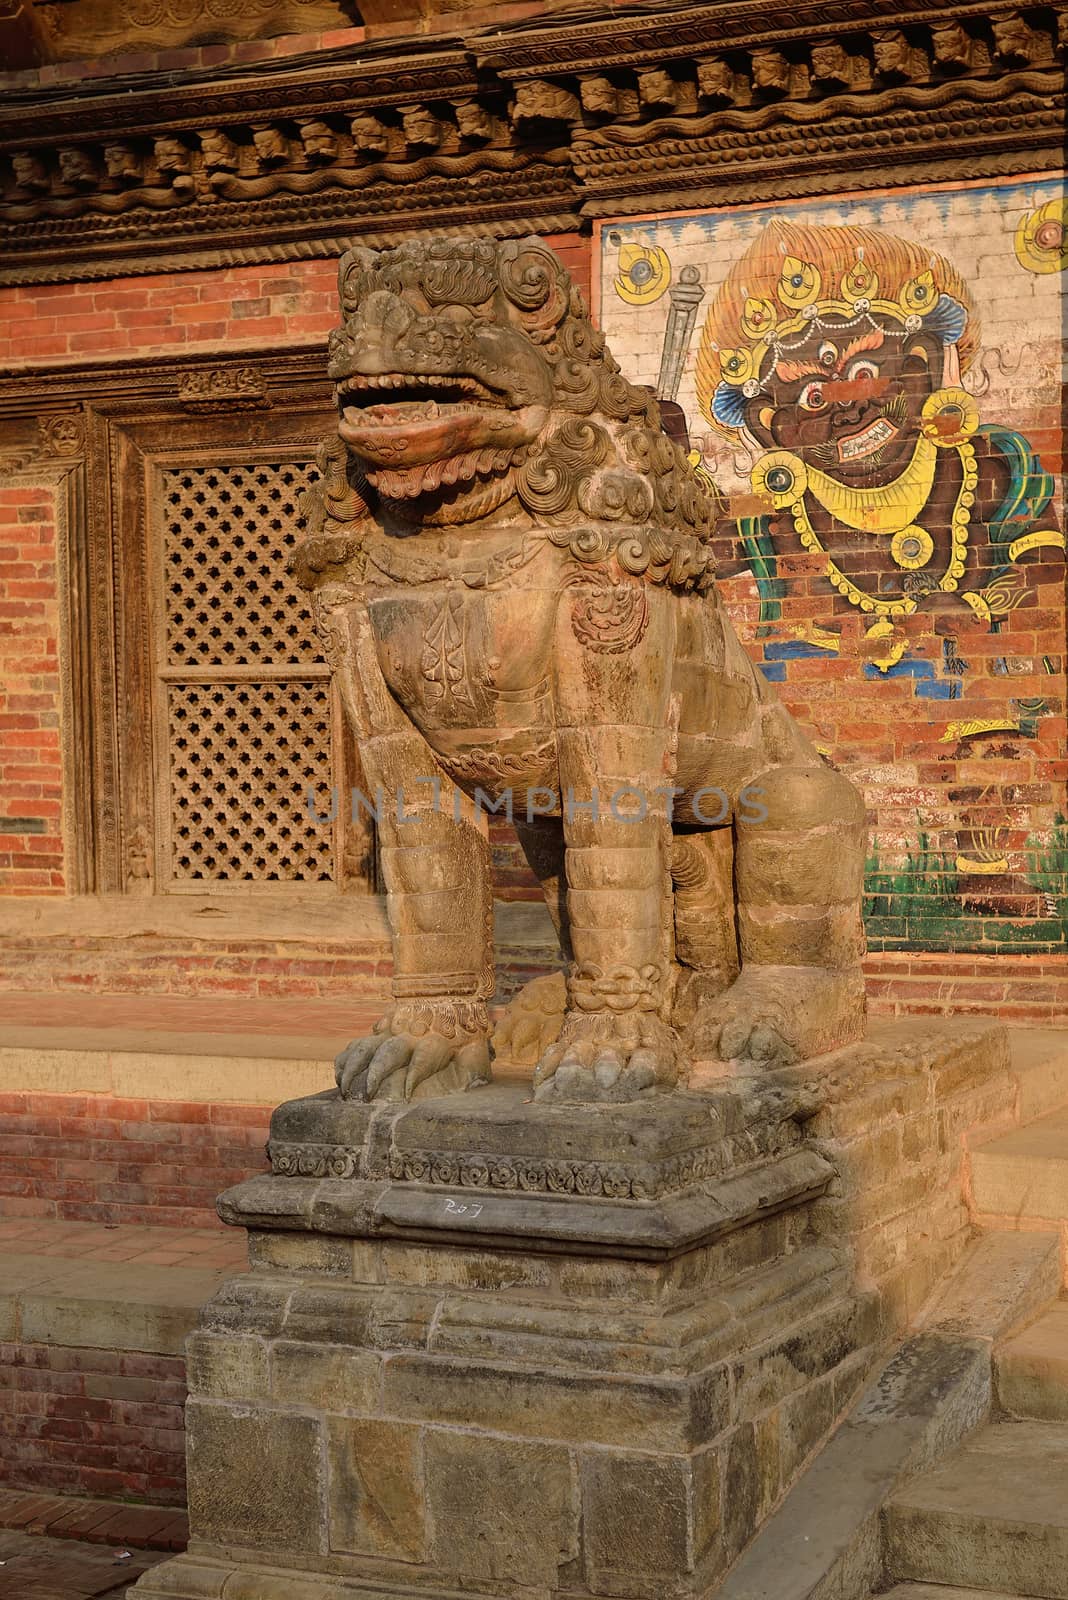 Sculptures at the durbar square, the center of patan, nepal by think4photop